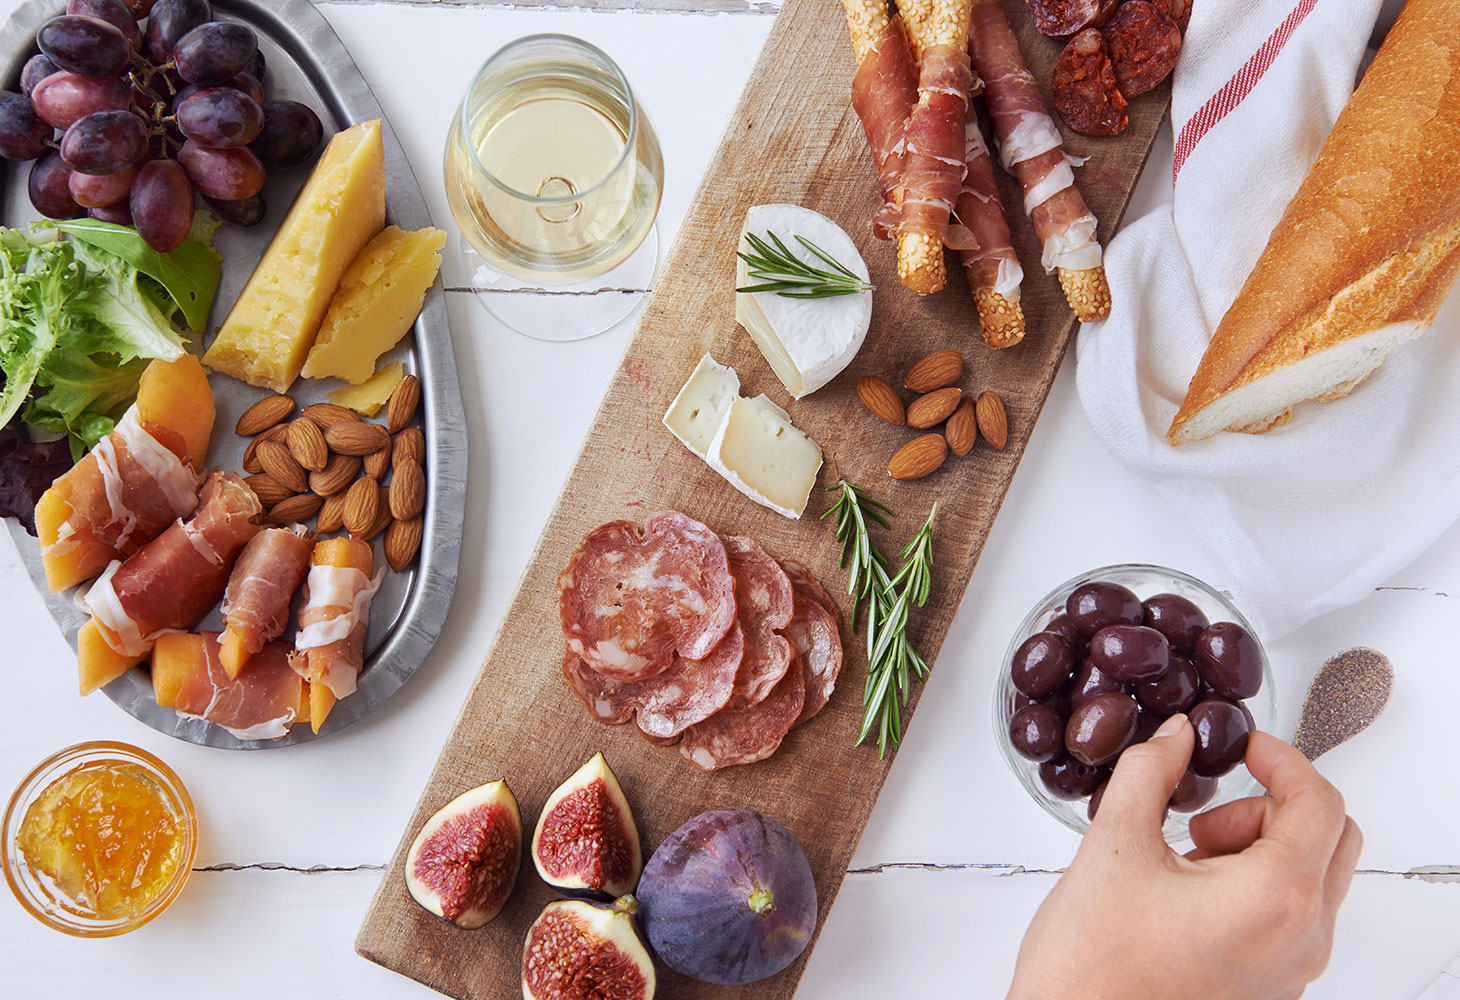 charcuterie board of meats, cheeses, fruits, and nuts with a glass of wine.